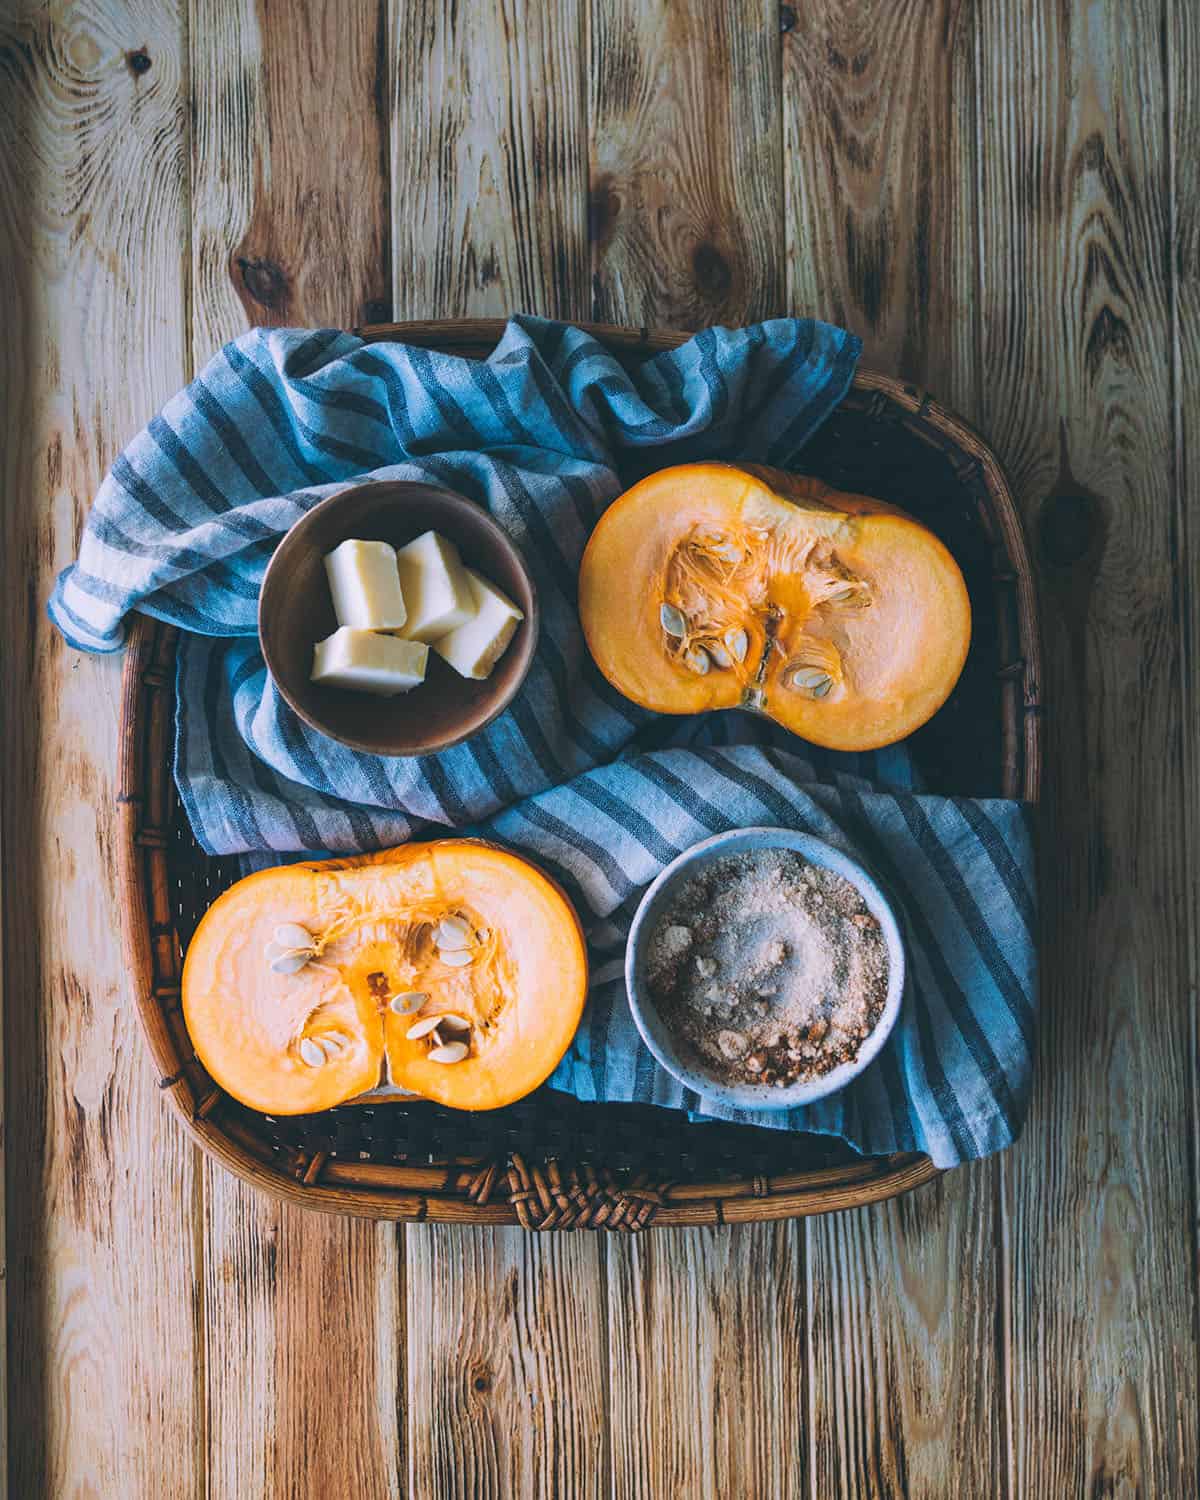 A sugar pumpkin cut in half, face up with butter and sugar with cinnamon in a bowl and butter in another small bowl, on a tray with a blue striped cloth, sitting on a wood surface. 